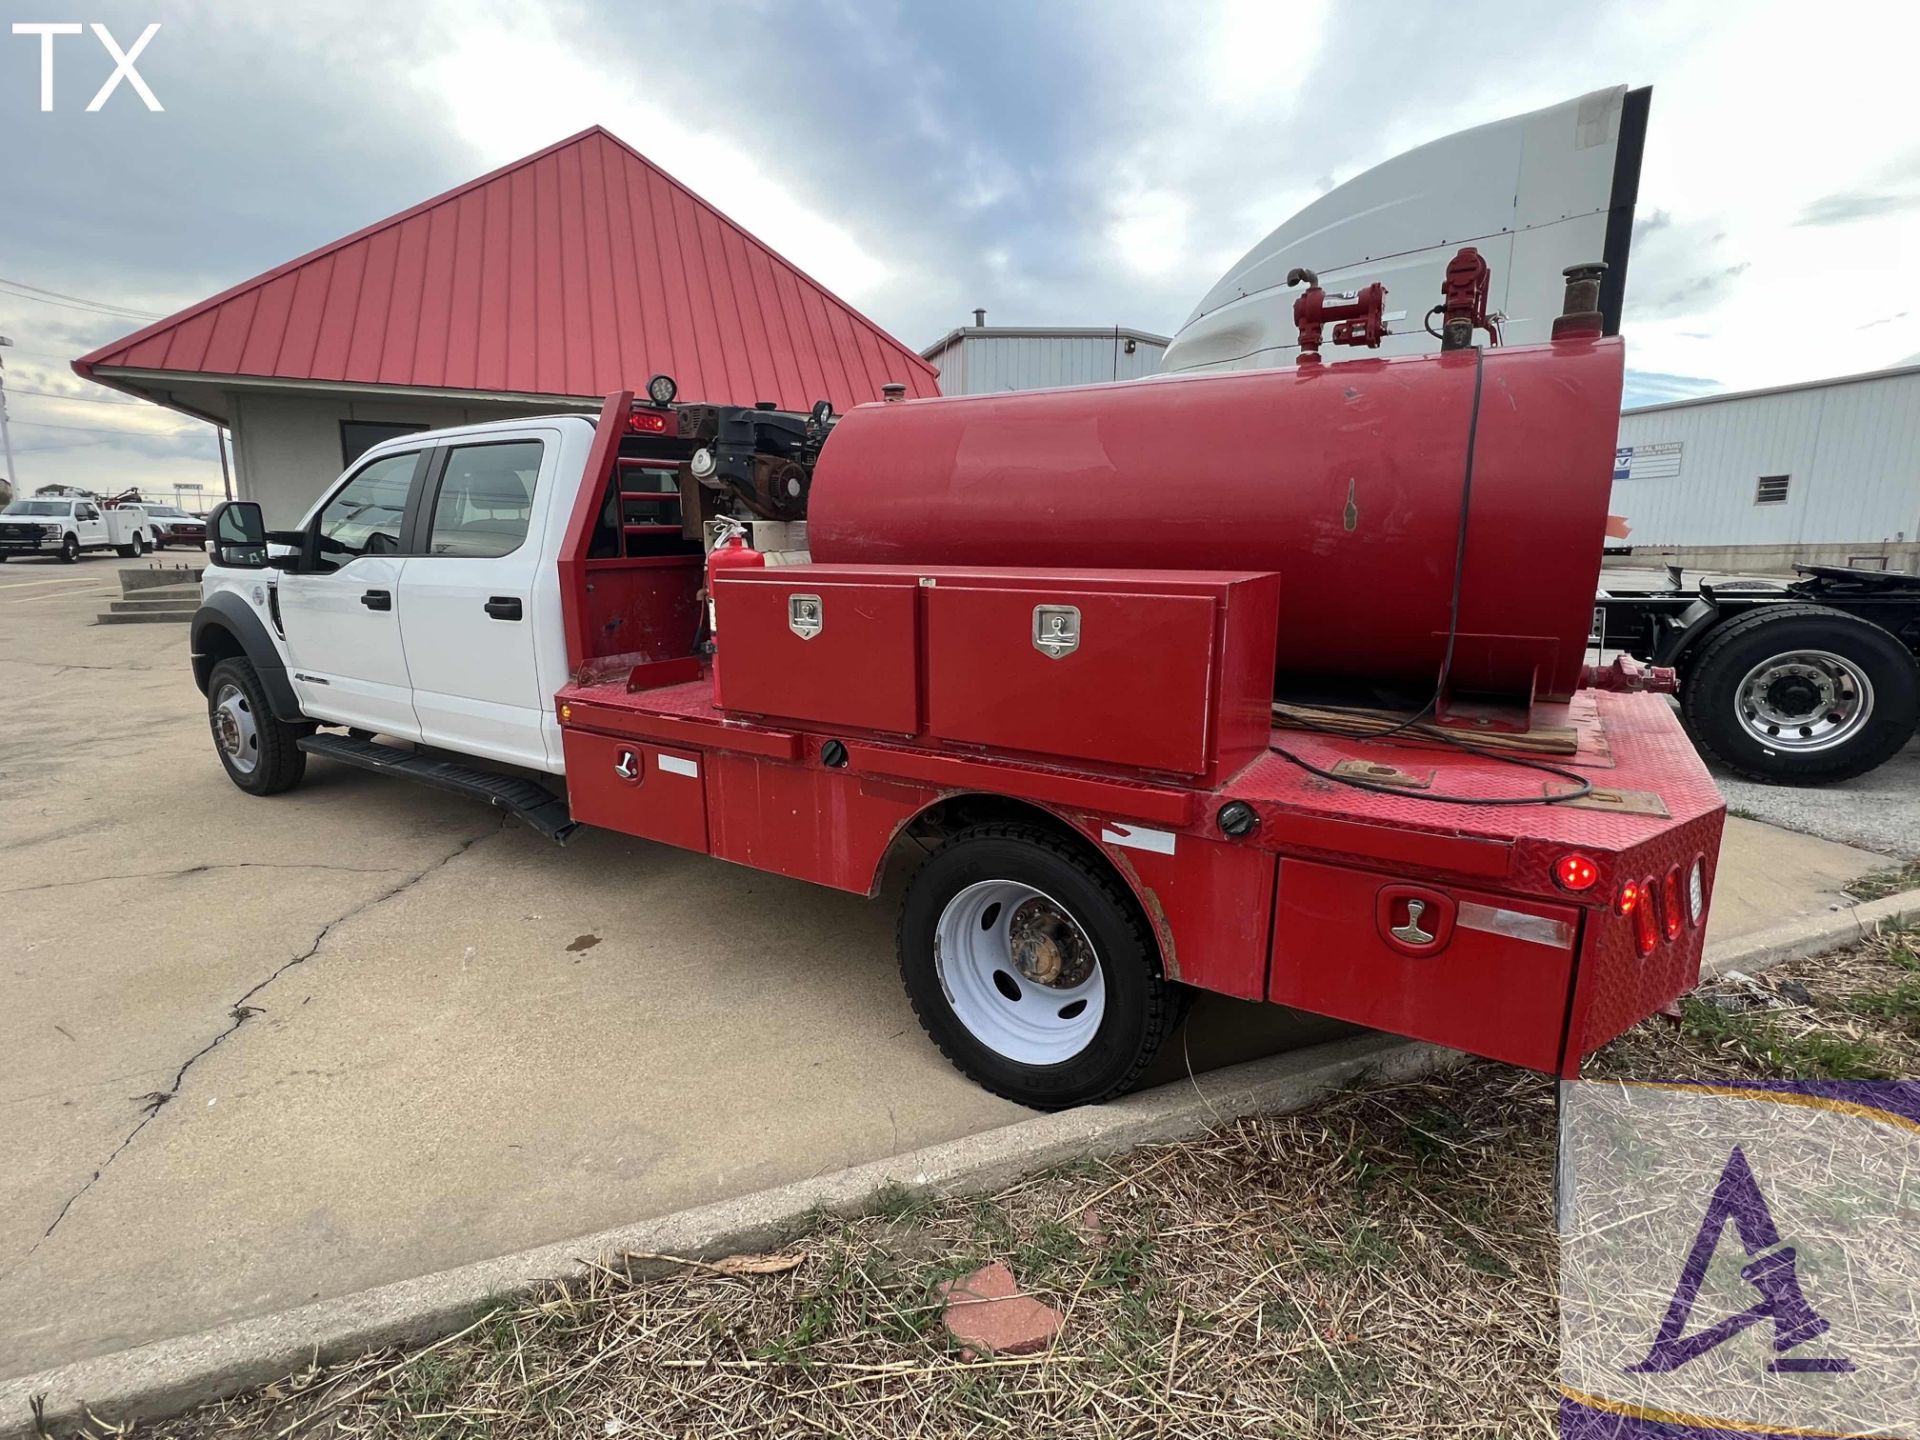 2019 Ford F550 4x4 Crew Cab Fuel Truck, Ingersoll-Rand Air Compressor, Toolboxes! - Image 5 of 20